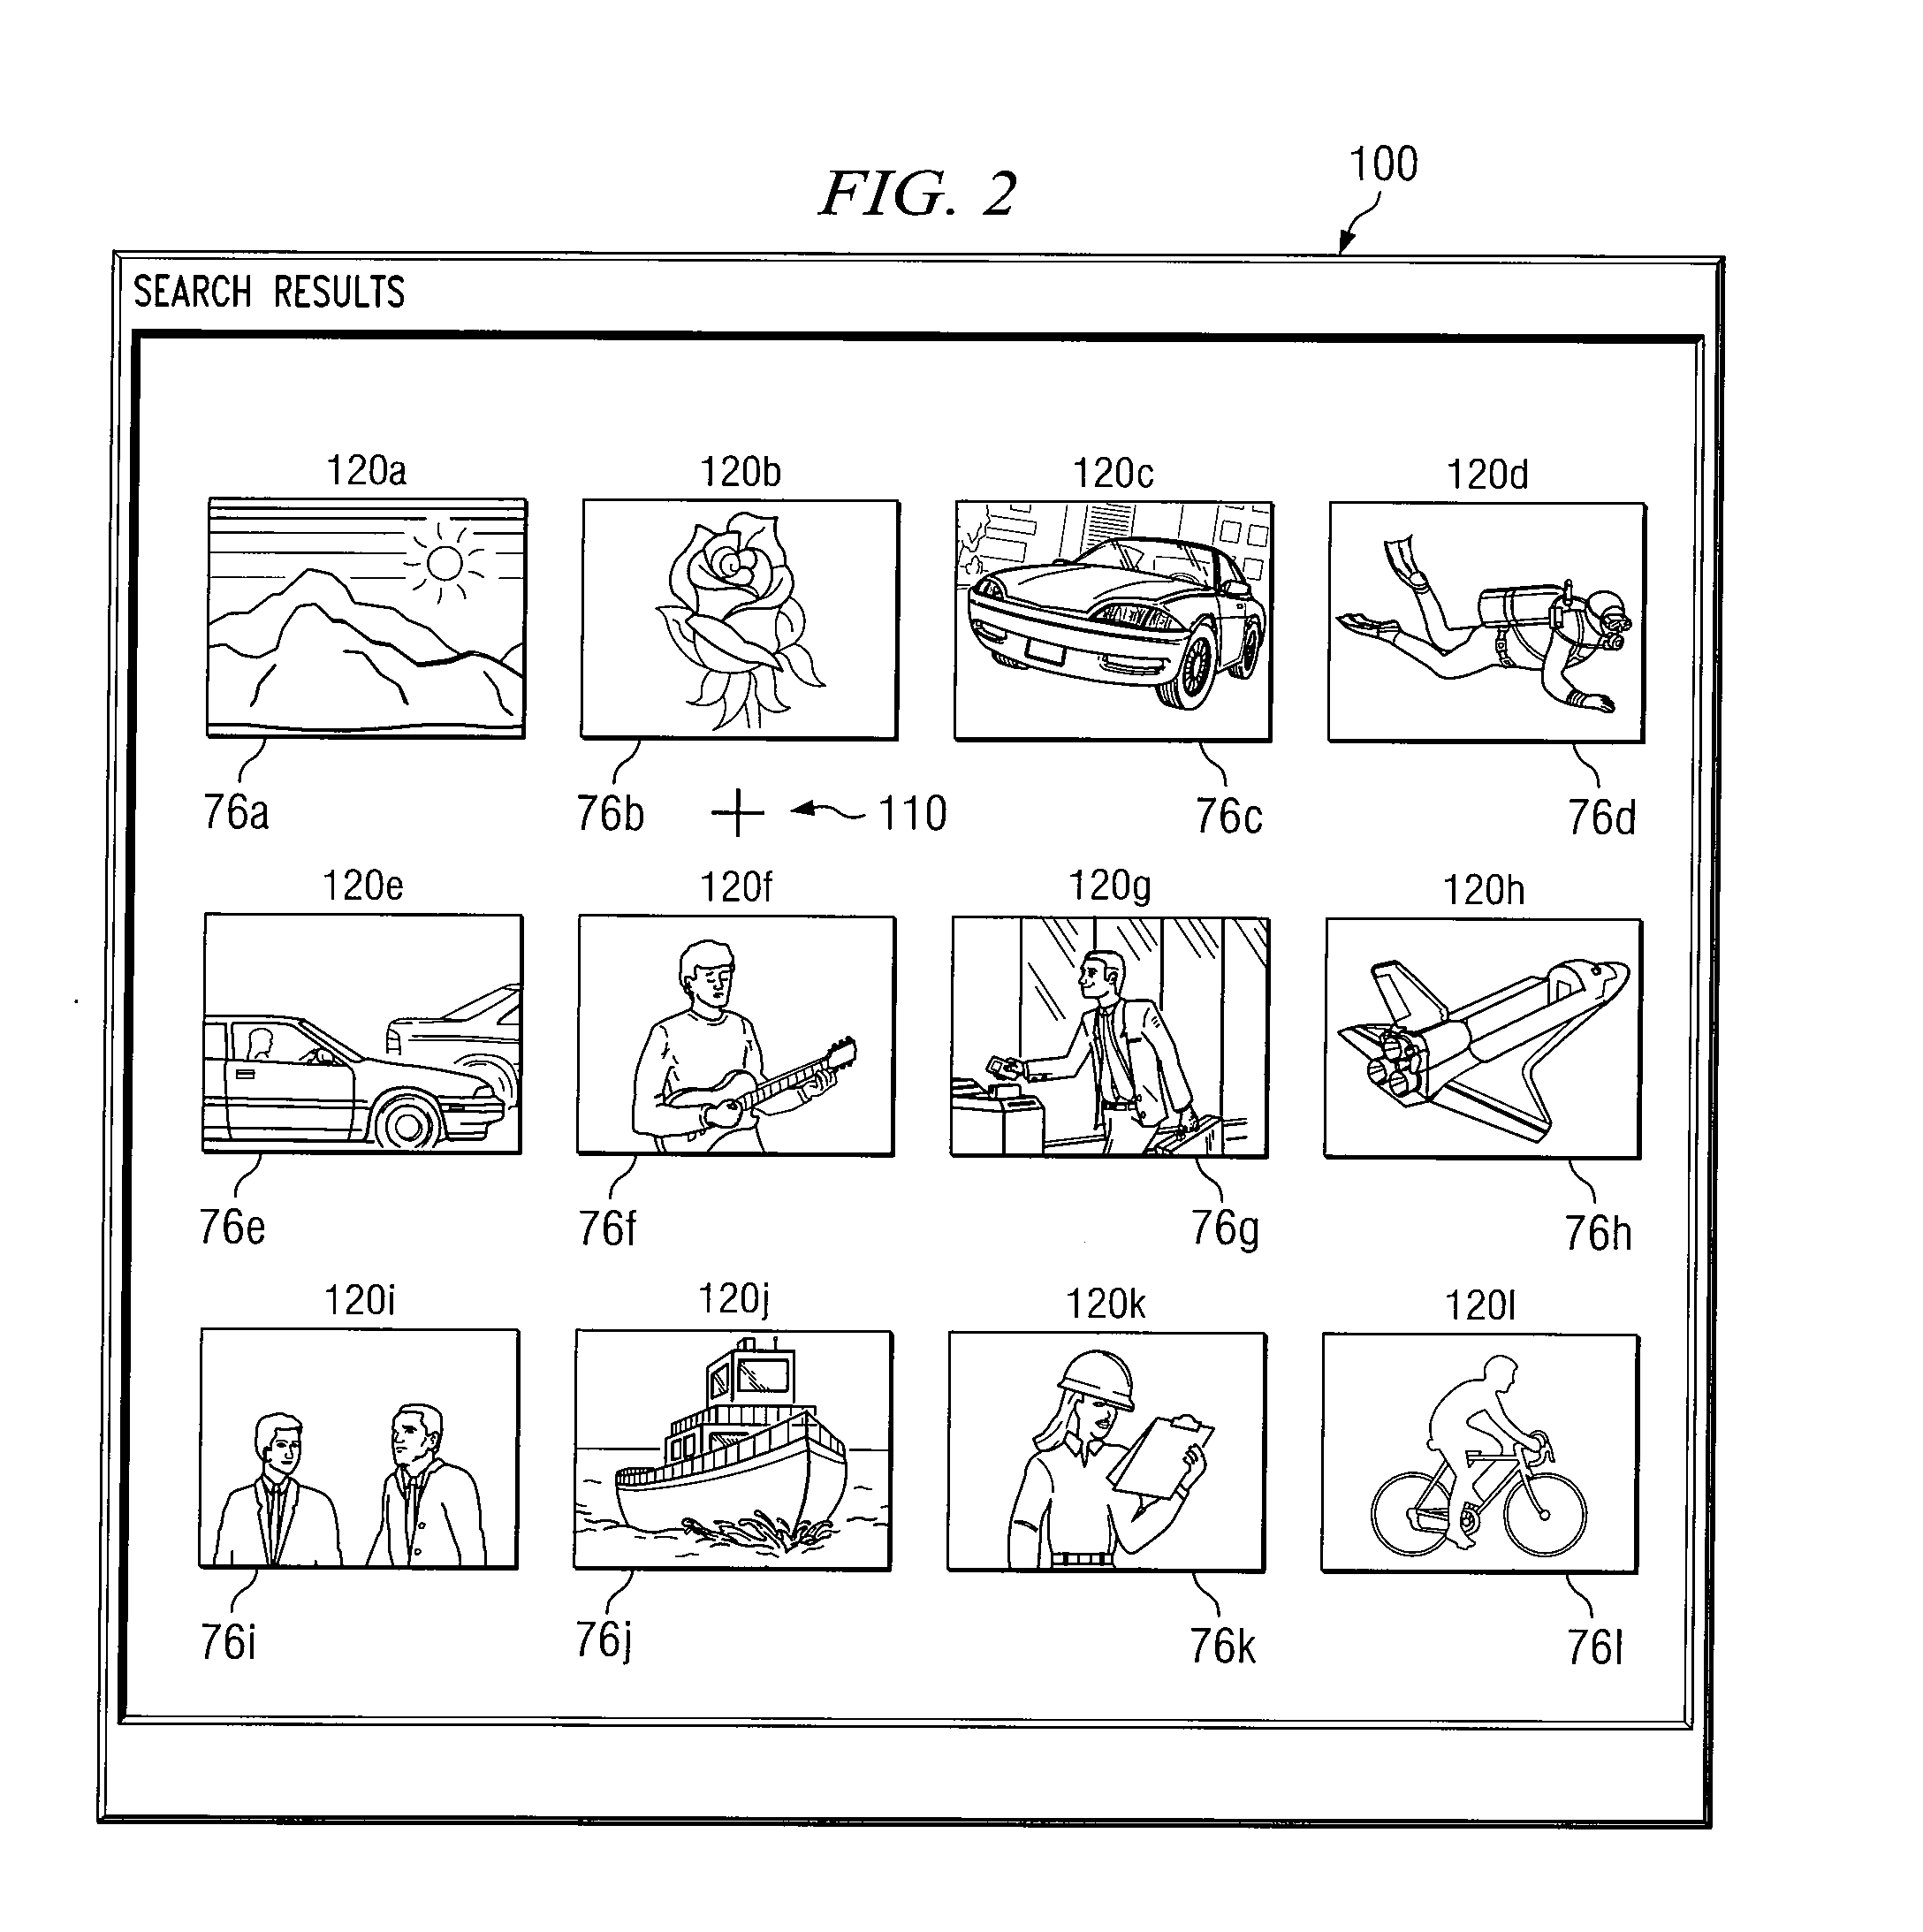 System and Method for Displaying Information